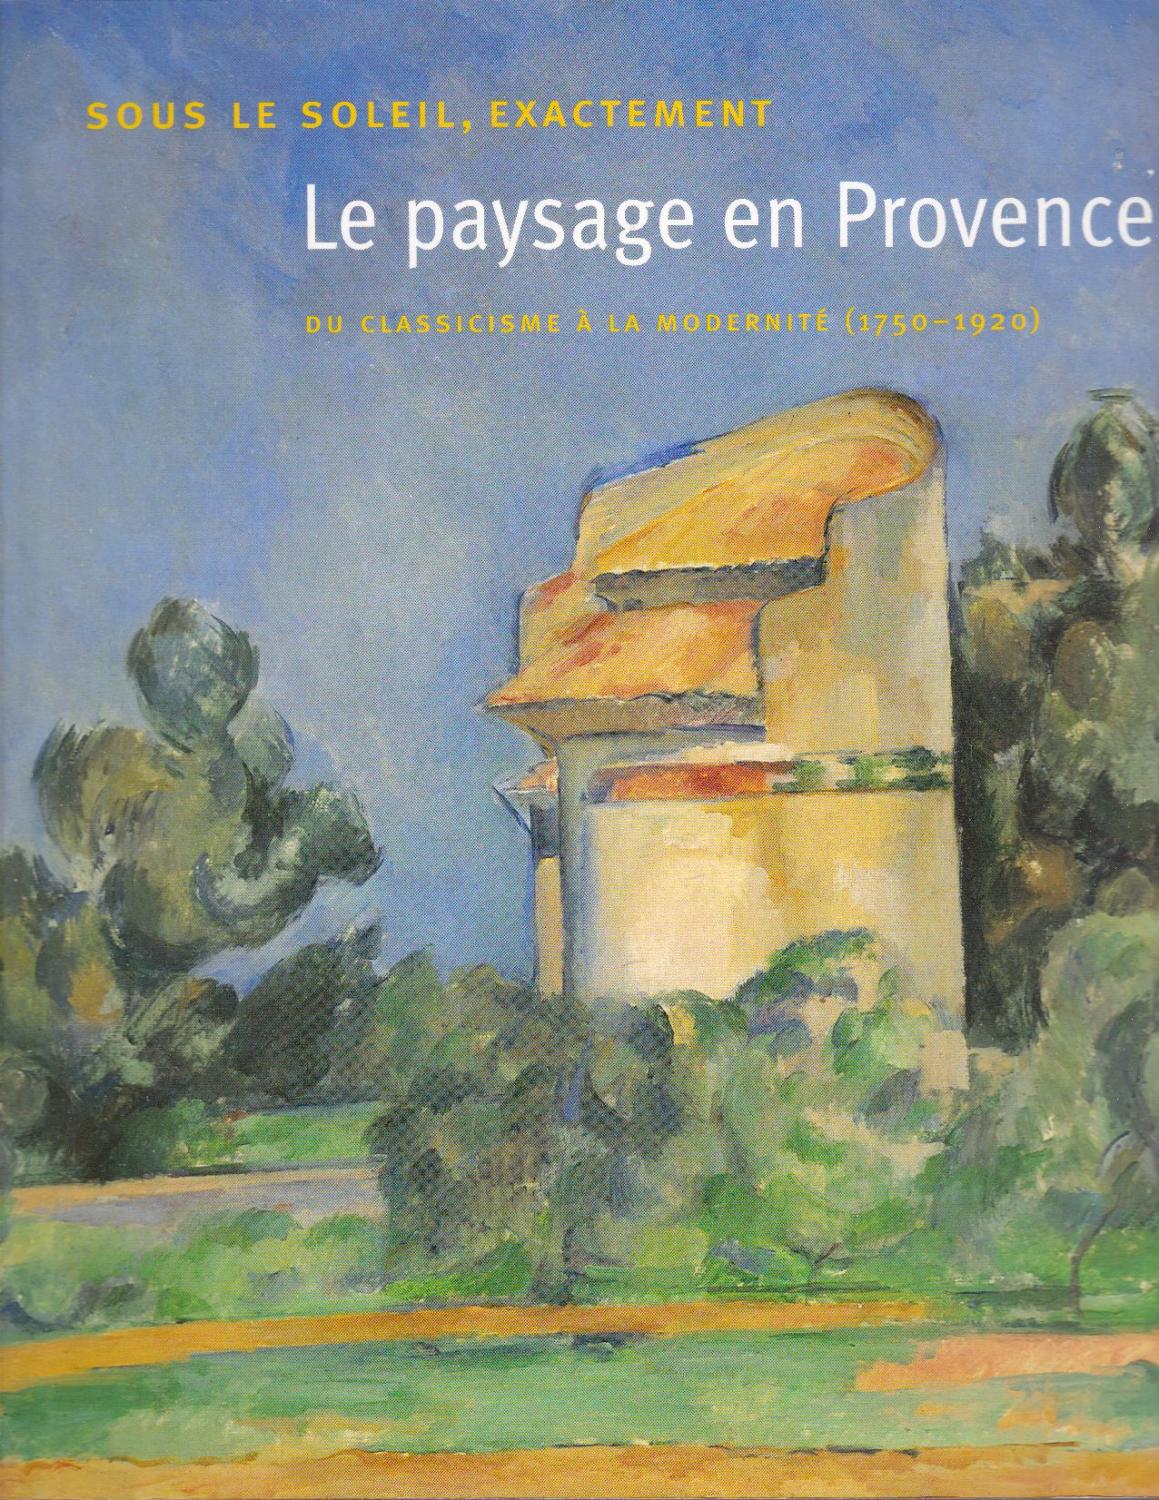 Right Under the Sun: Landscape in Provence, from Classicism to Modernism (1750-1920)